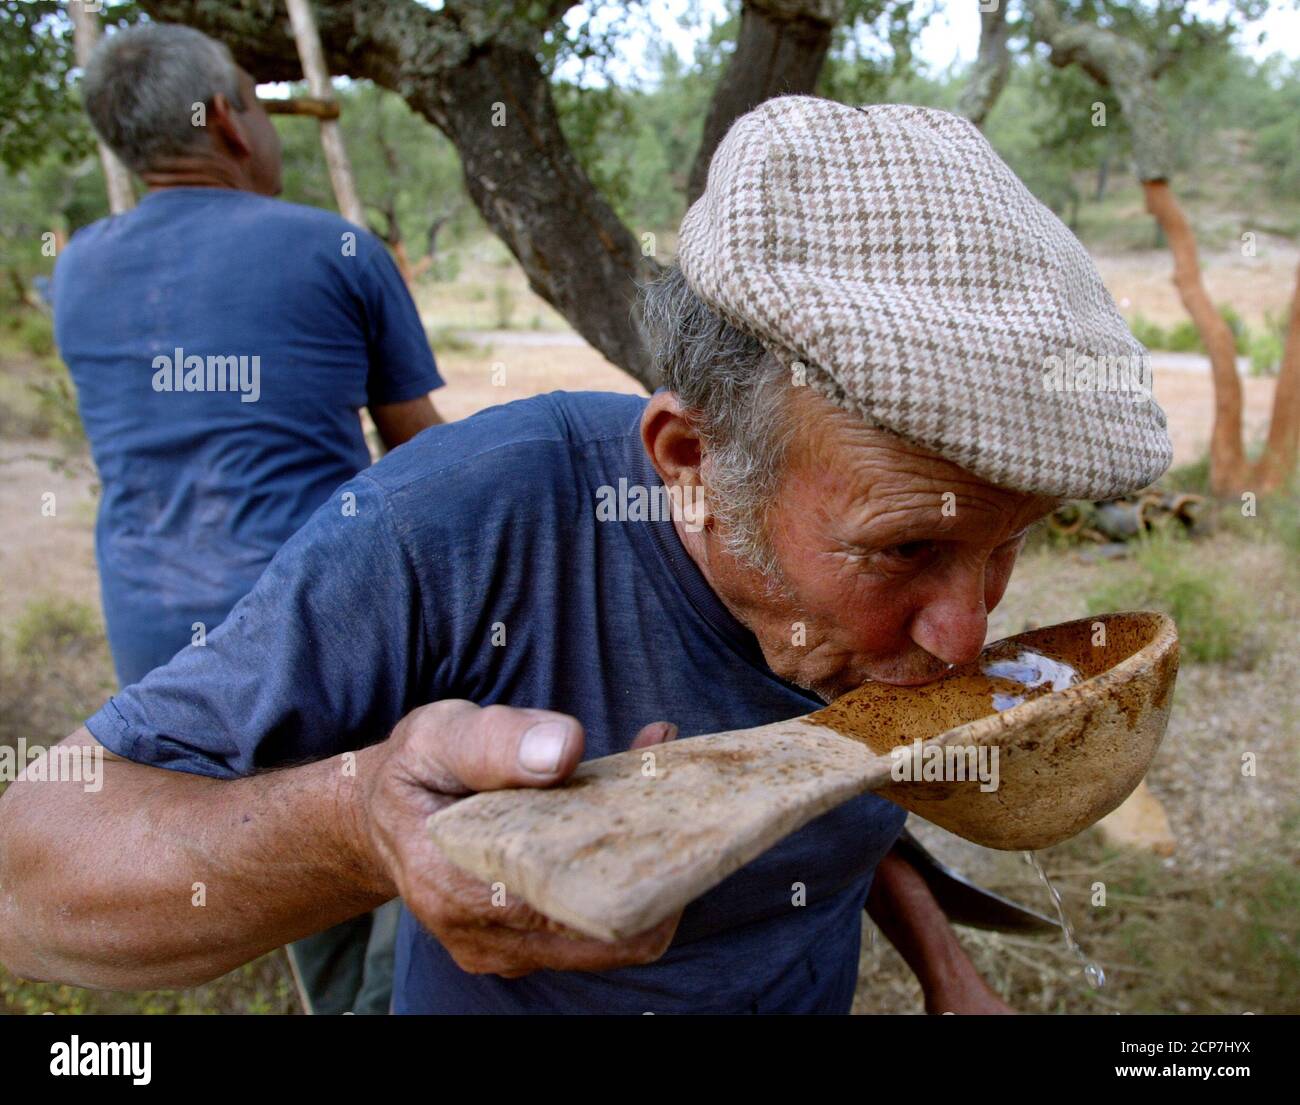 TO MATCH FEATURE - PORTUGAL CORK - Farm worker Antonio Boneco drinks water from a 'cocho', a giant spoon made of natural cork, on a farm at Santana do Mato in the Portuguese Southern Province of Alentejo in this picture taken July 1, 2003. Boneco strips bark from cork trees on the farm in Portugal which is the world's biggest producer of natural cork, a time-consuming business which could be squeezed out by plastic stoppers that are far easier to make and claim to preserve the taste of wine better.  REUTERS/Jose Manuel Ribeiro Stock Photo